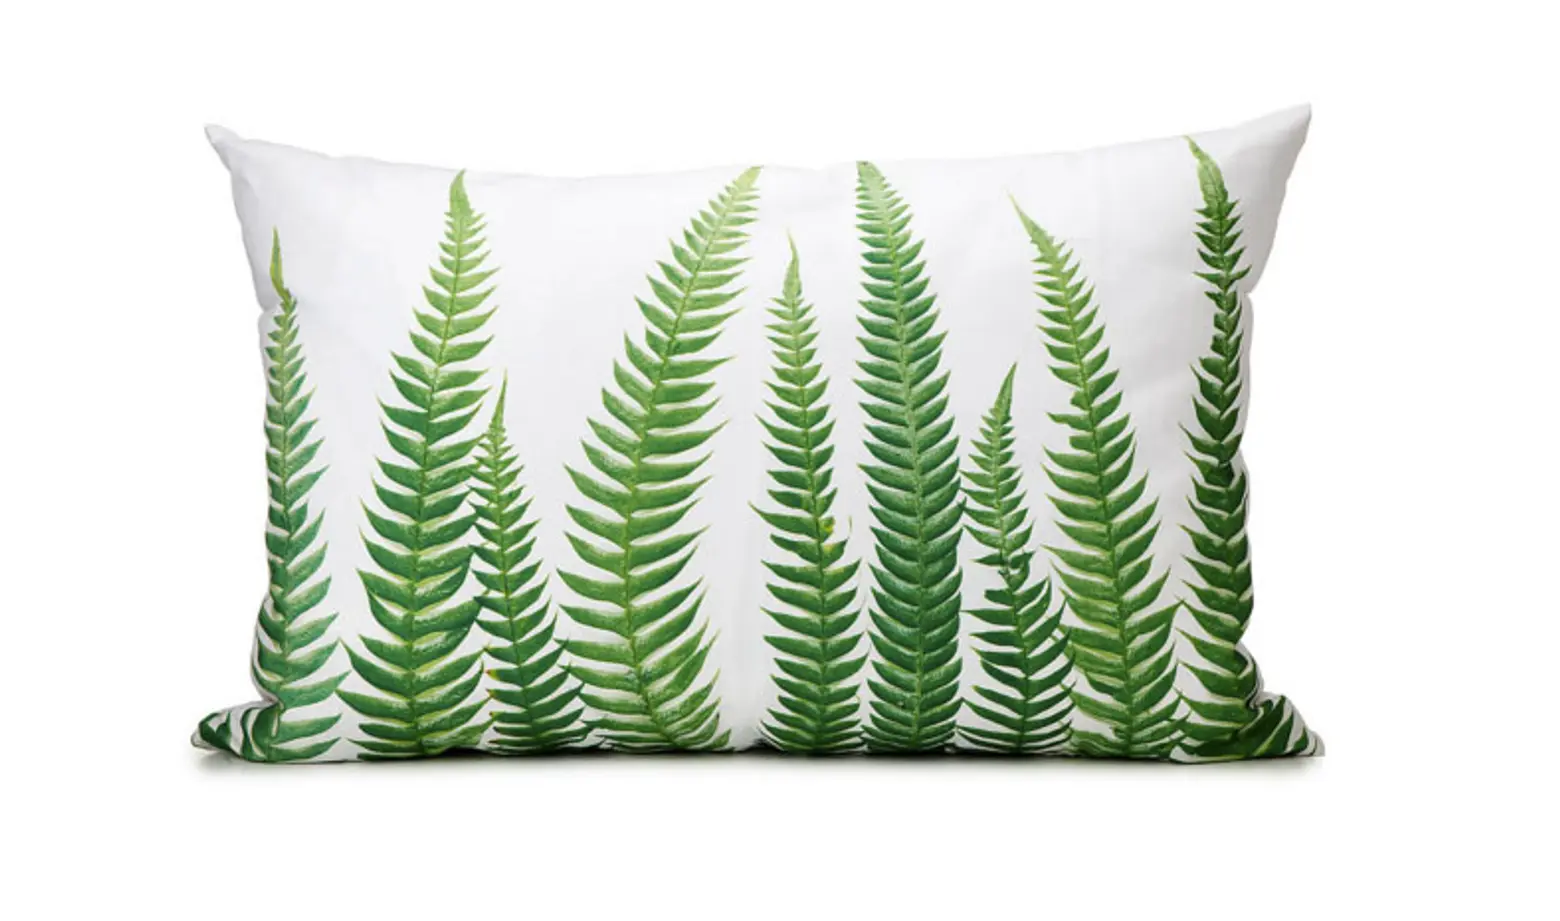 Photographer Barry Rosenthal Designs Home Accessories Inspired by Nature